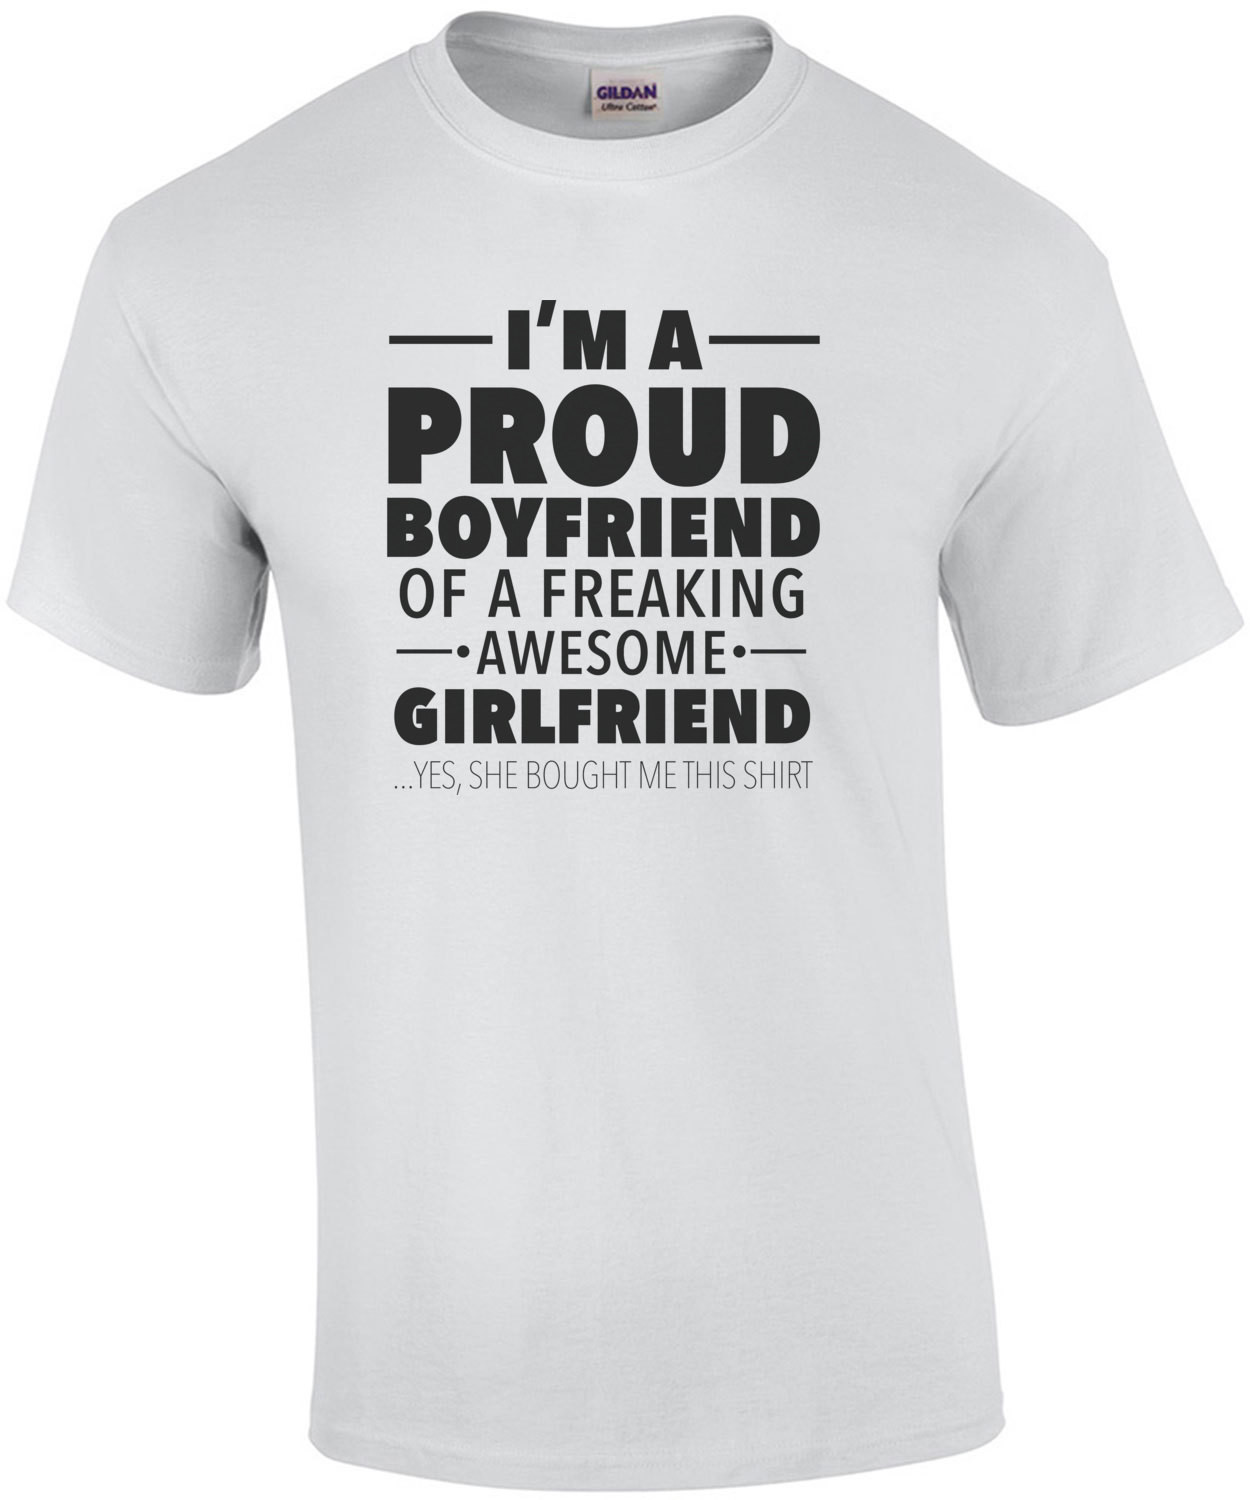 I'm a proud boyfriend of a freaking awesome girlfriend - yes, she bought me this shirt - funny relationship tshirt